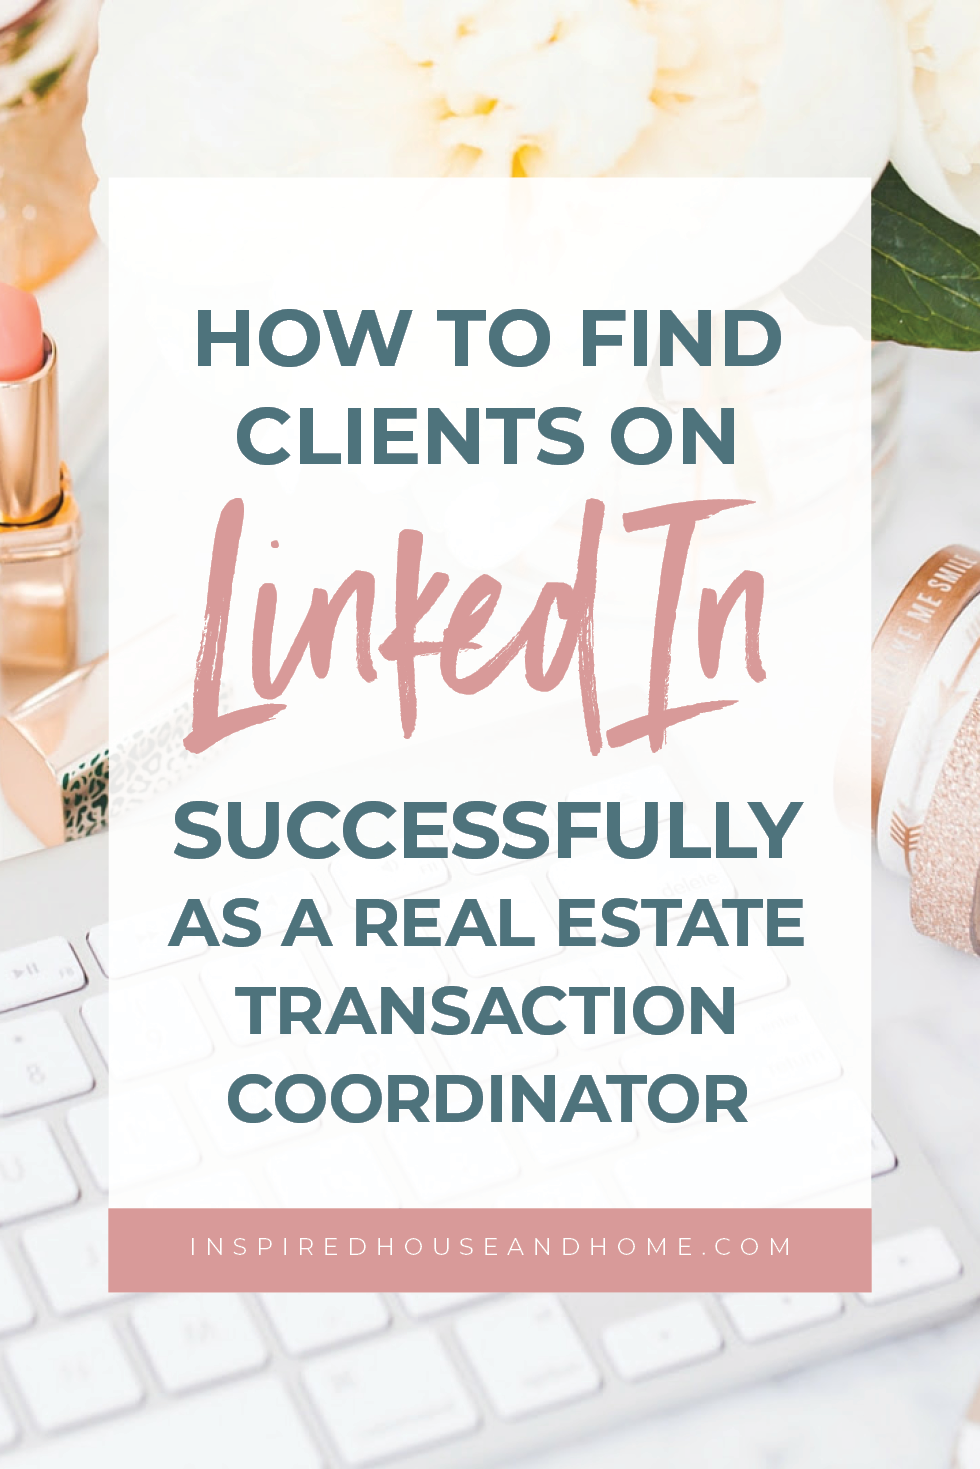 How To Find Clients On LinkedIn Successfully As A Transaction Coordinator | Inspired House and Home